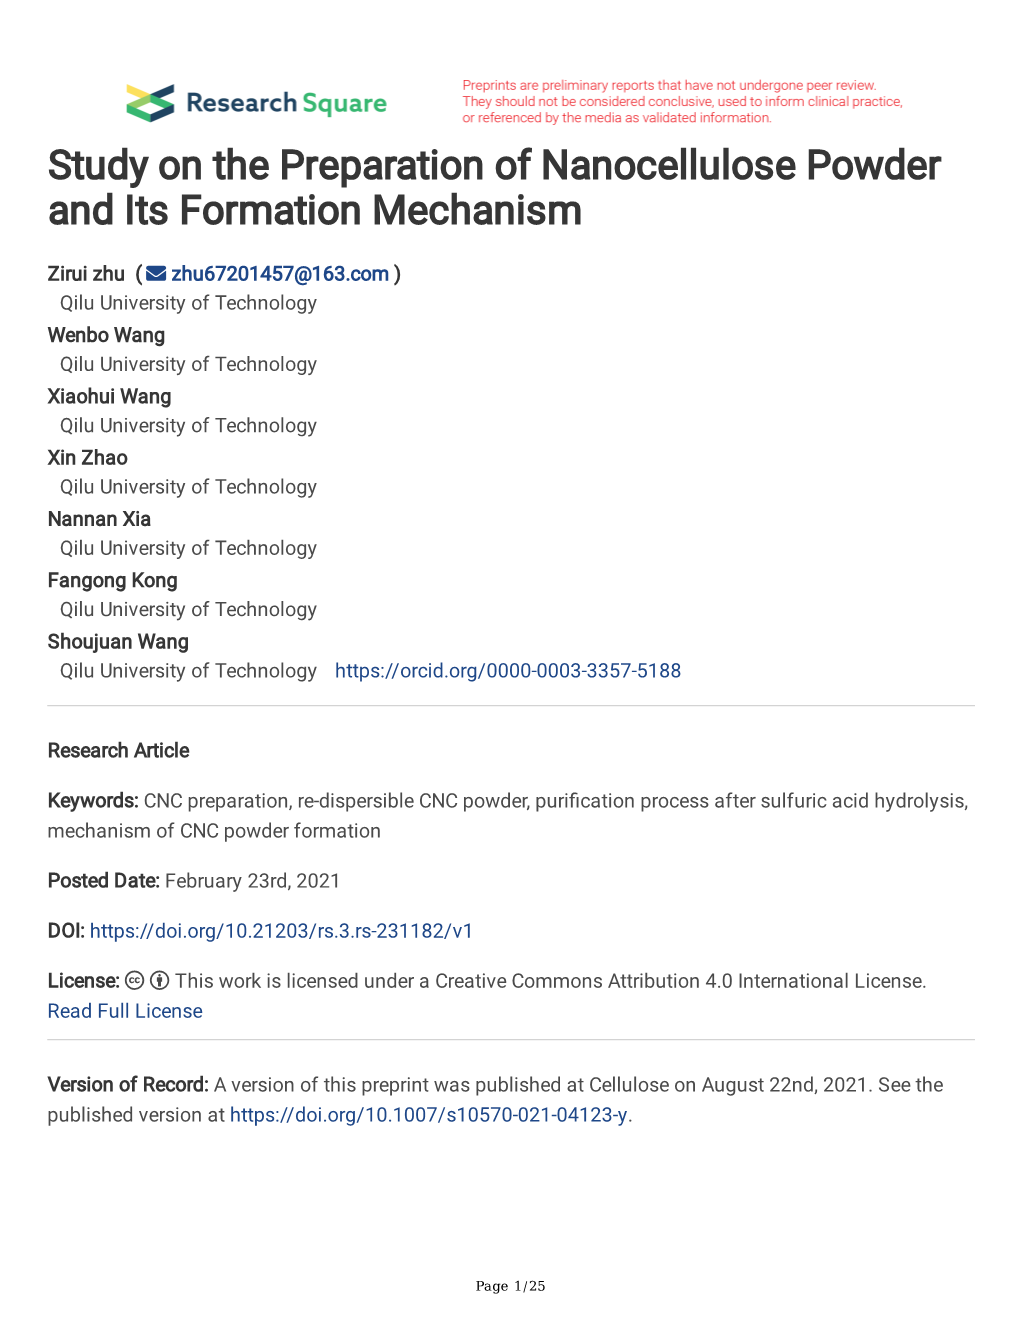 Study on the Preparation of Nanocellulose Powder and Its Formation Mechanism